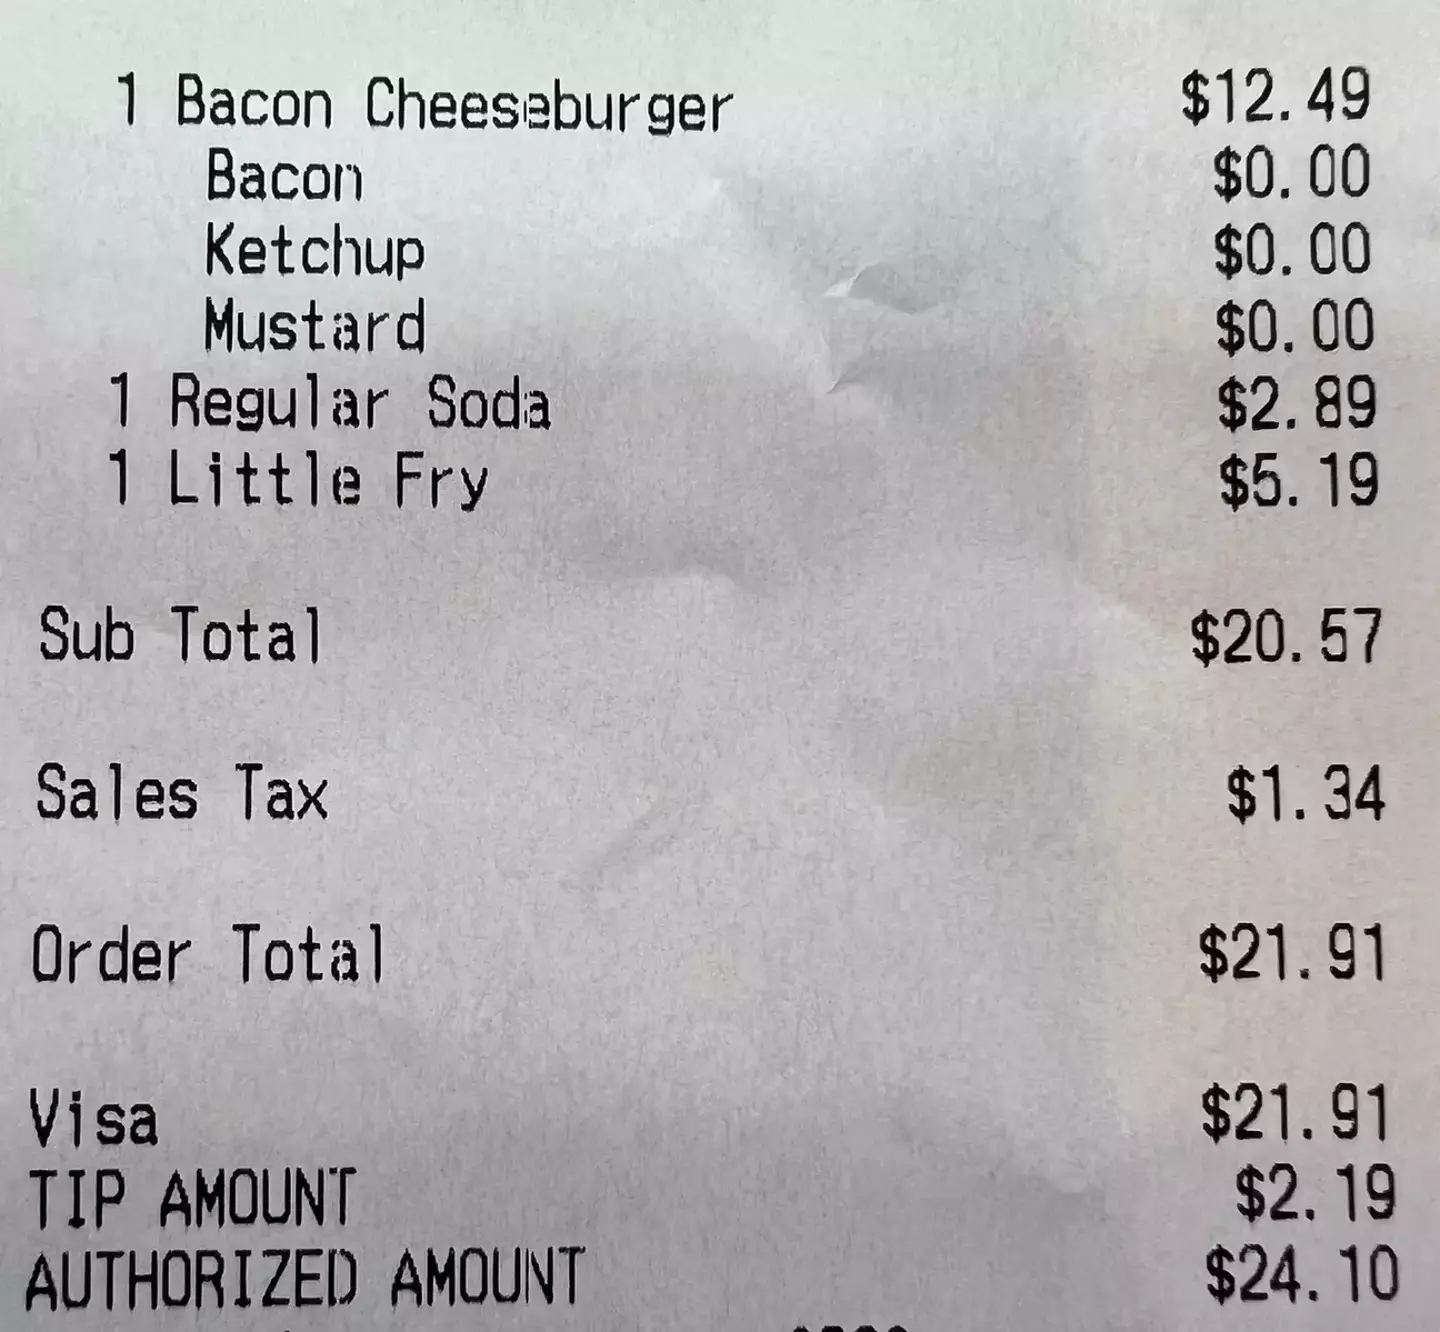 A receipt showed on social media shows just how much the burger, fries, and soda cost.